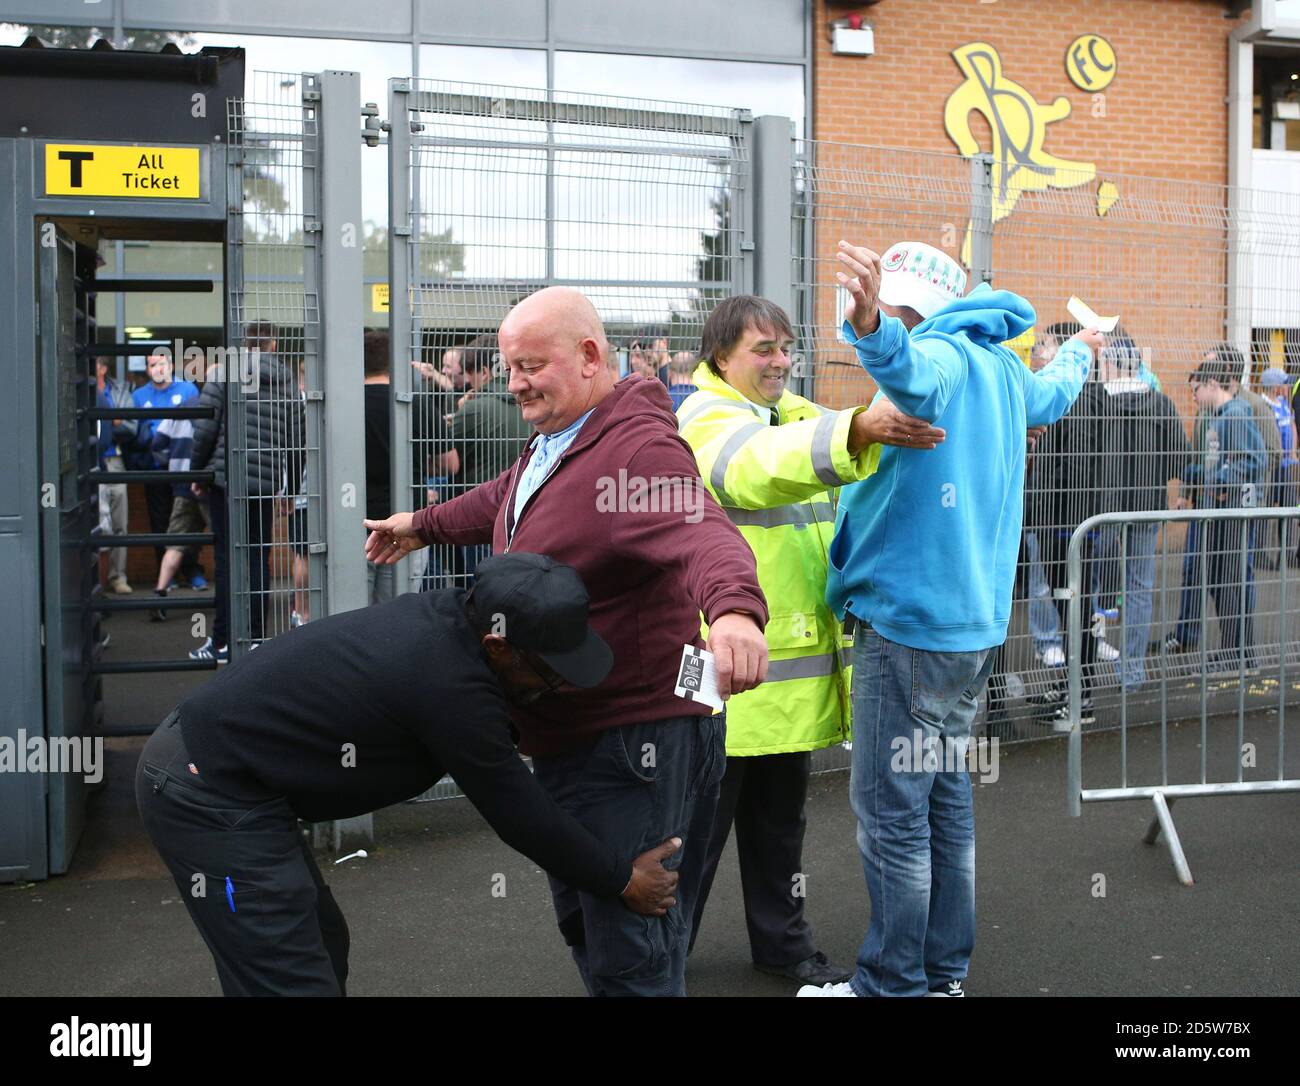 Cardiff City fans are searched as they arrive at the stadium Stock Photo